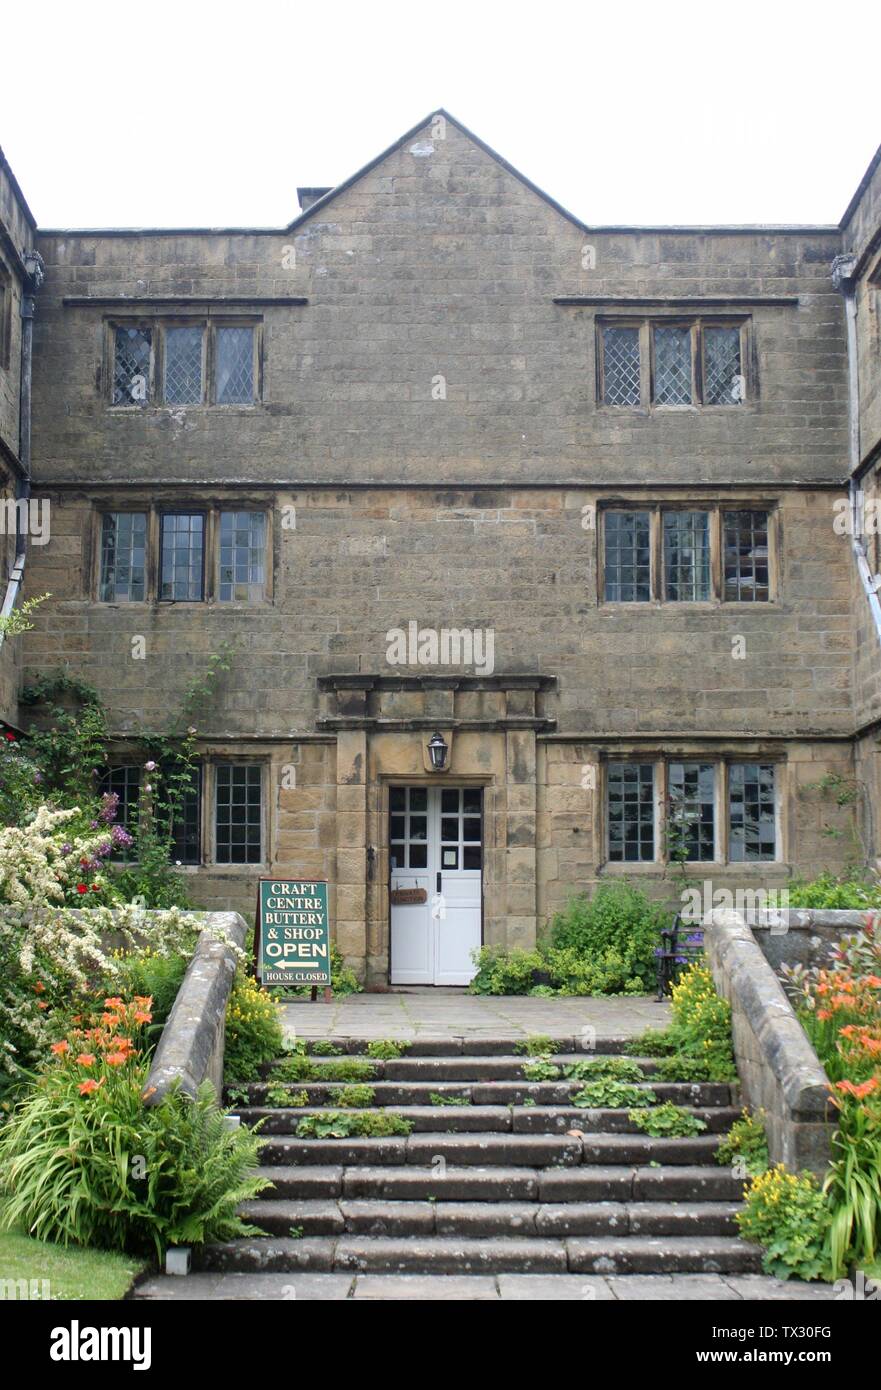 Eyam Hall, in Eyam, Derbyshire, England.  Built in 1671.; 21 June 2007; Own work; Dave Pape; Stock Photo